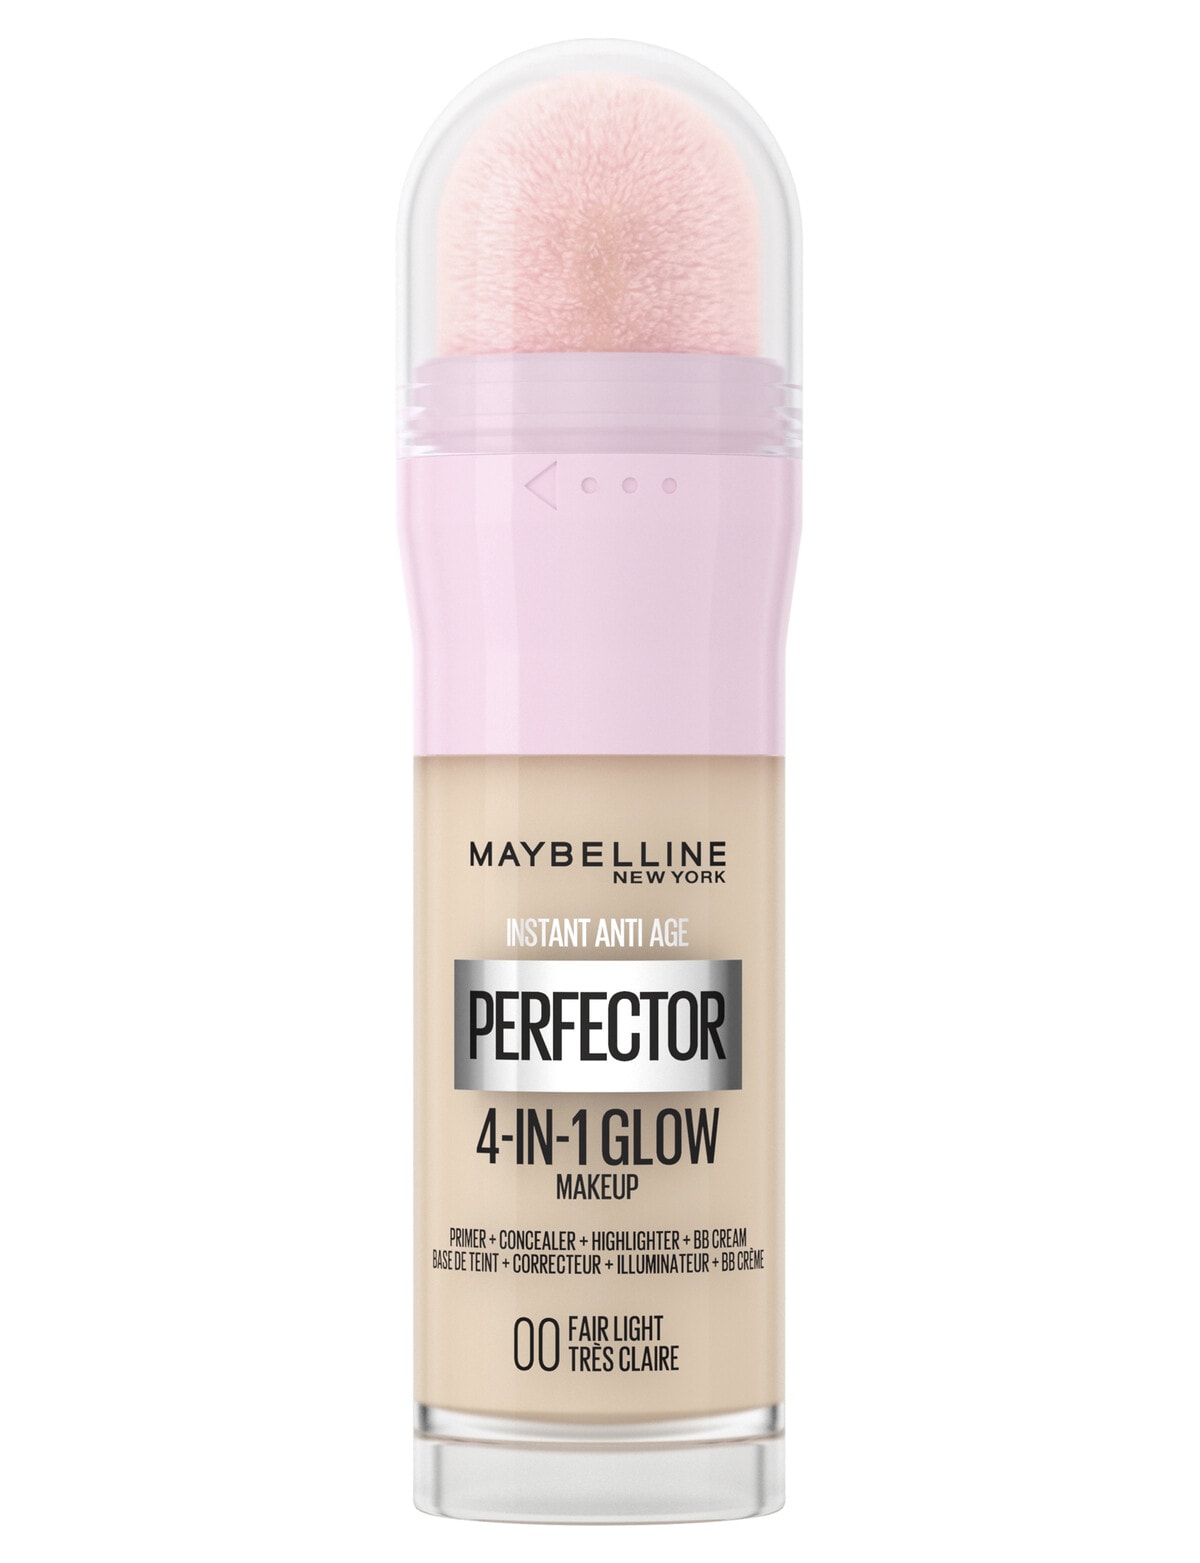 4-In-1 Maybelline - Rewind Age Makeup Instant Instant Glow Perfector Face